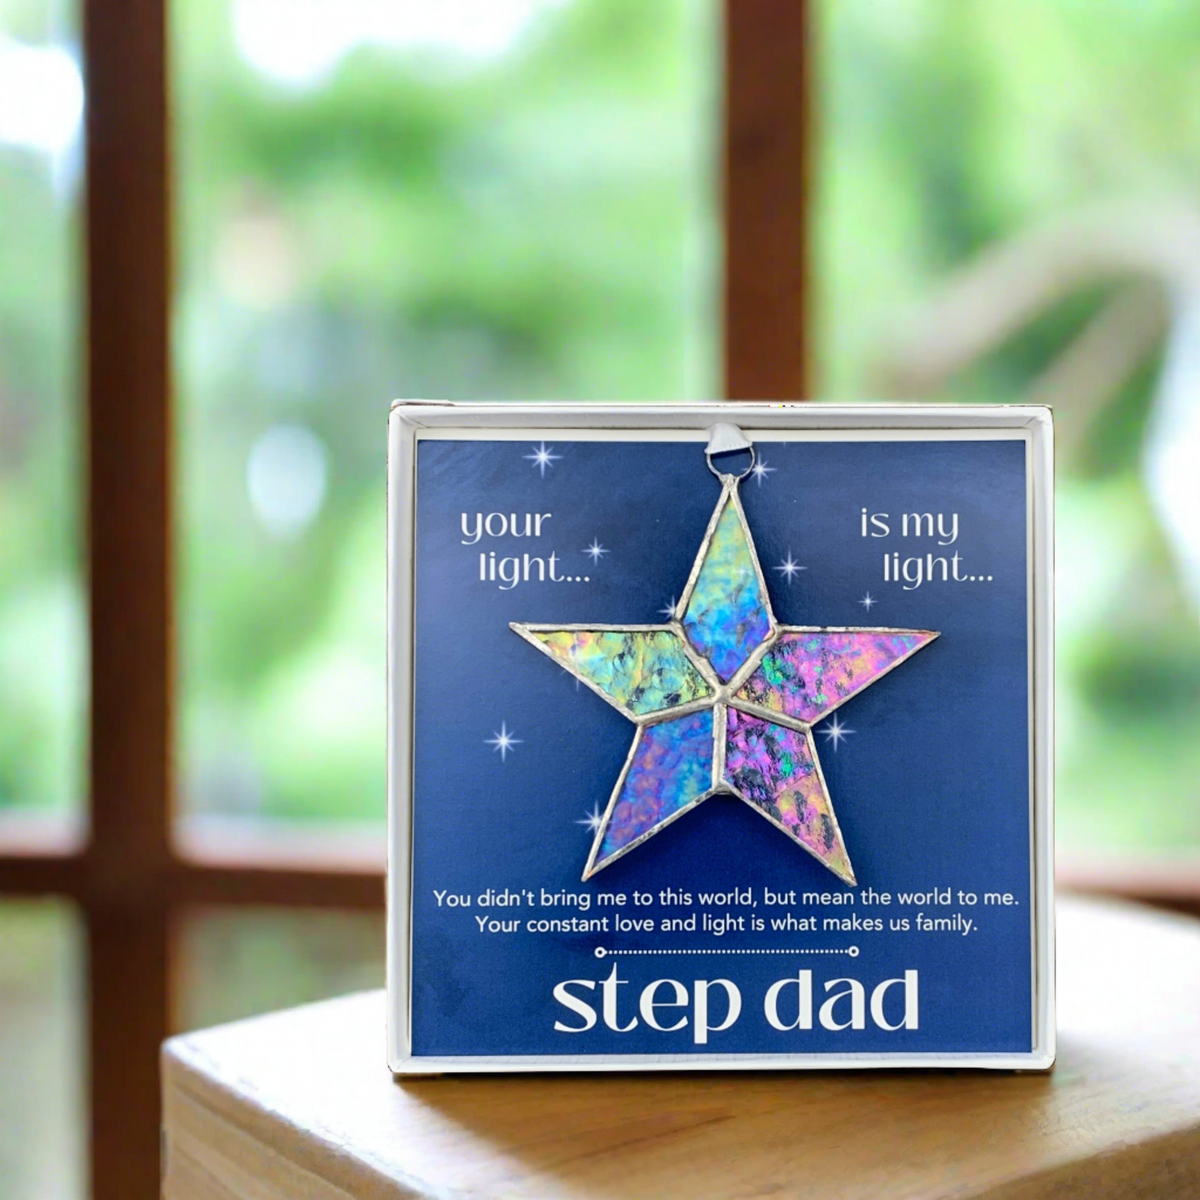 Meaningful sentiment and star gift for stepdad.